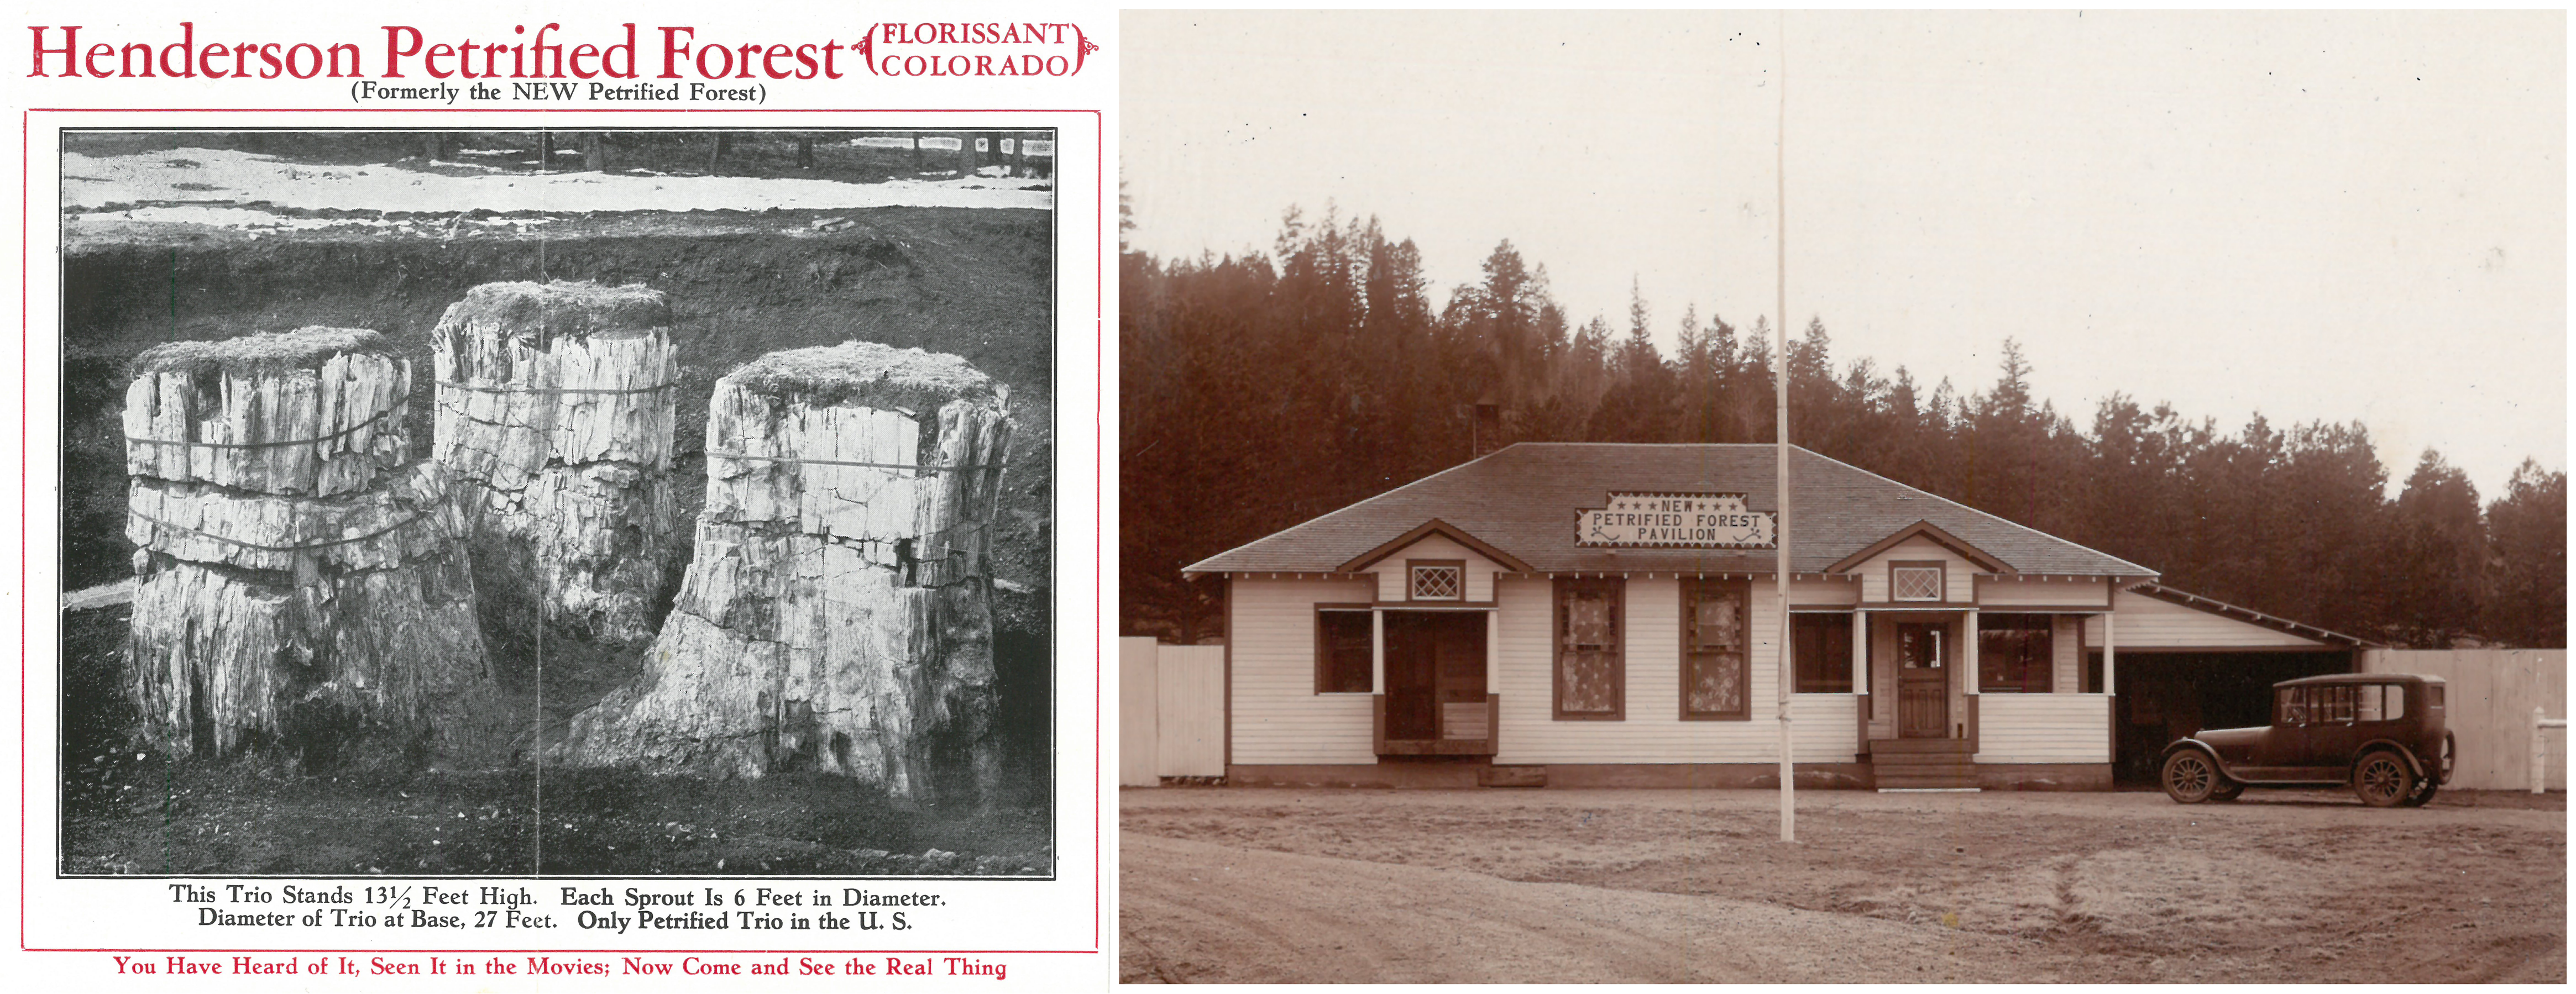 A brochure on the left advertising the Henderson Petrified Forest and an old photograph of a building and car on the right, the building has a sign that says New Petrified Forest.